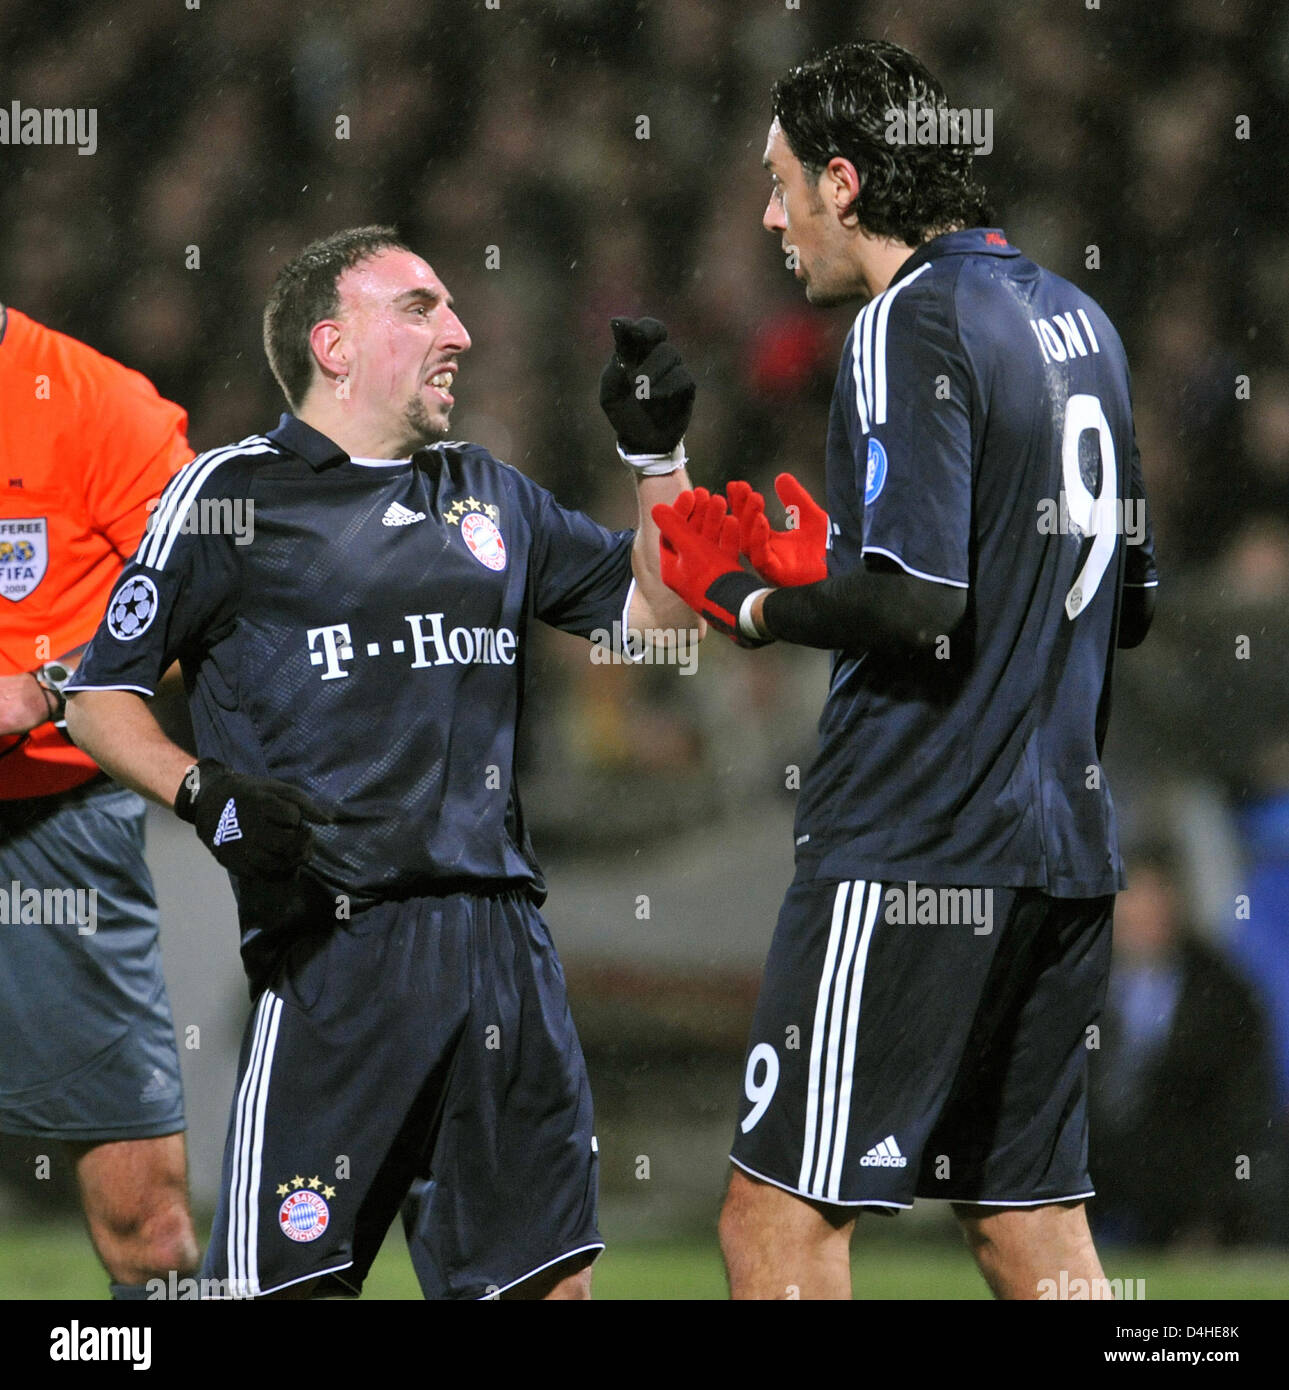 FC Bayern Munich players Franck Ribery (L) and Luca Toni quarrel during the Champions League Group F match against Olympique Lyon at Stade de Gerland in Lyon, France, 10 December 2008. Bayern Munich defeated Lyon 3-2 securing the first place in UEFA Champions League Group F. Photo: Andreas Gebert Stock Photo